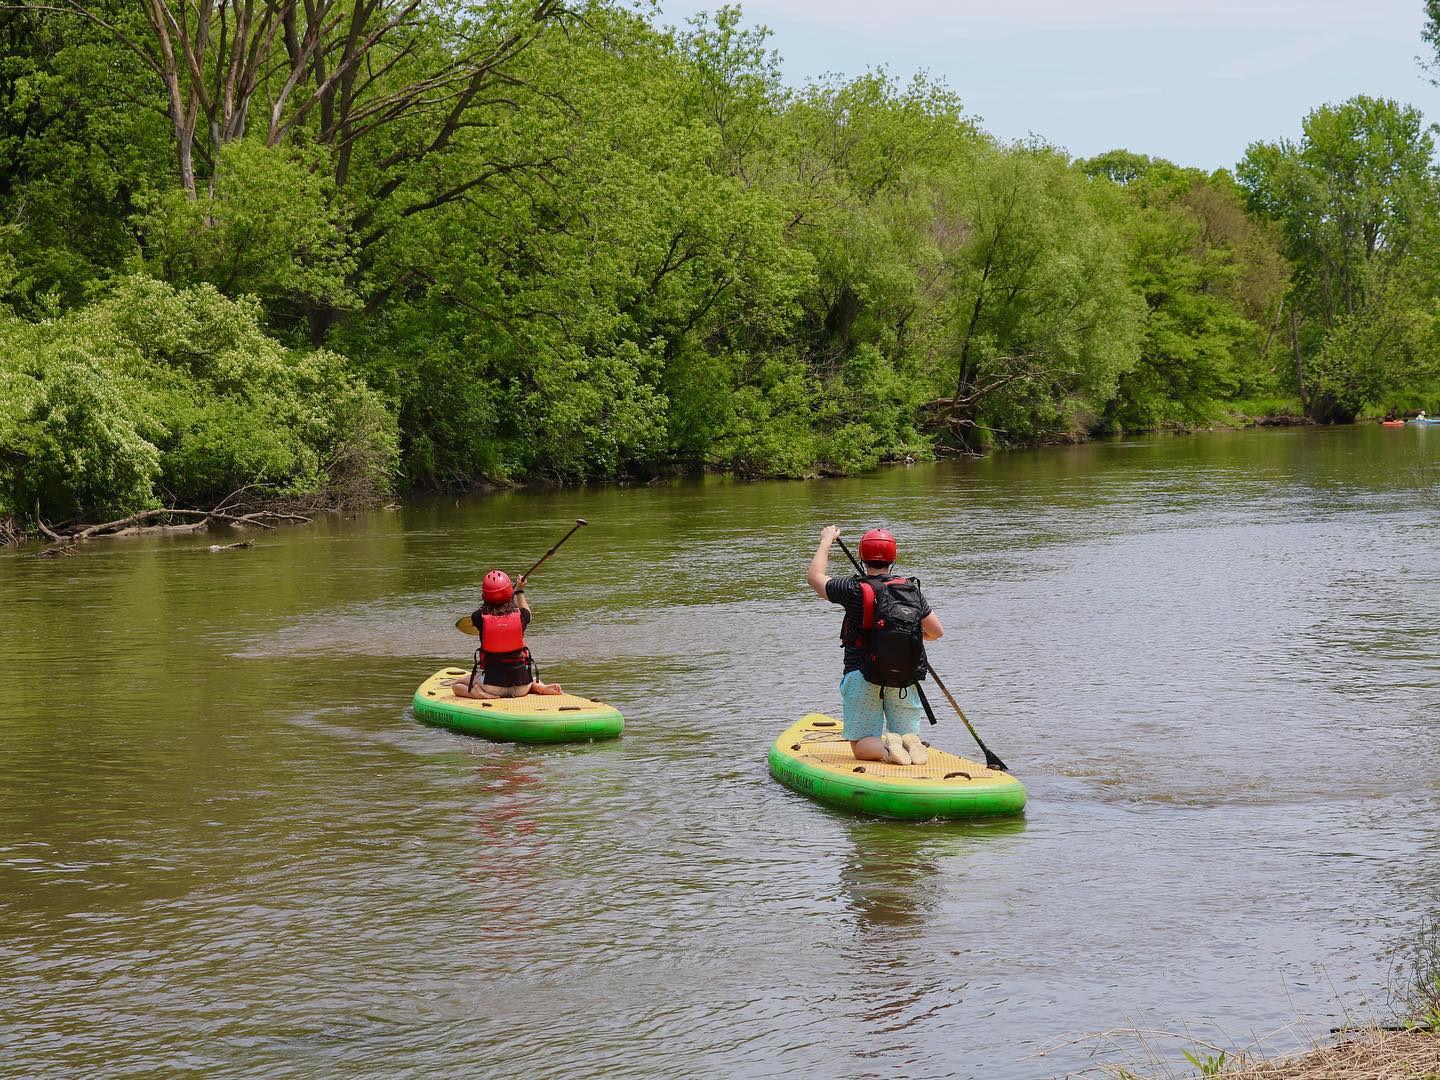 Ever tried stand-up paddle boarding? The DuPage River is a great place to start! Our beginner friendly paddle-boards are great for any experience level. Book with us today at www.napervillekayak.com.